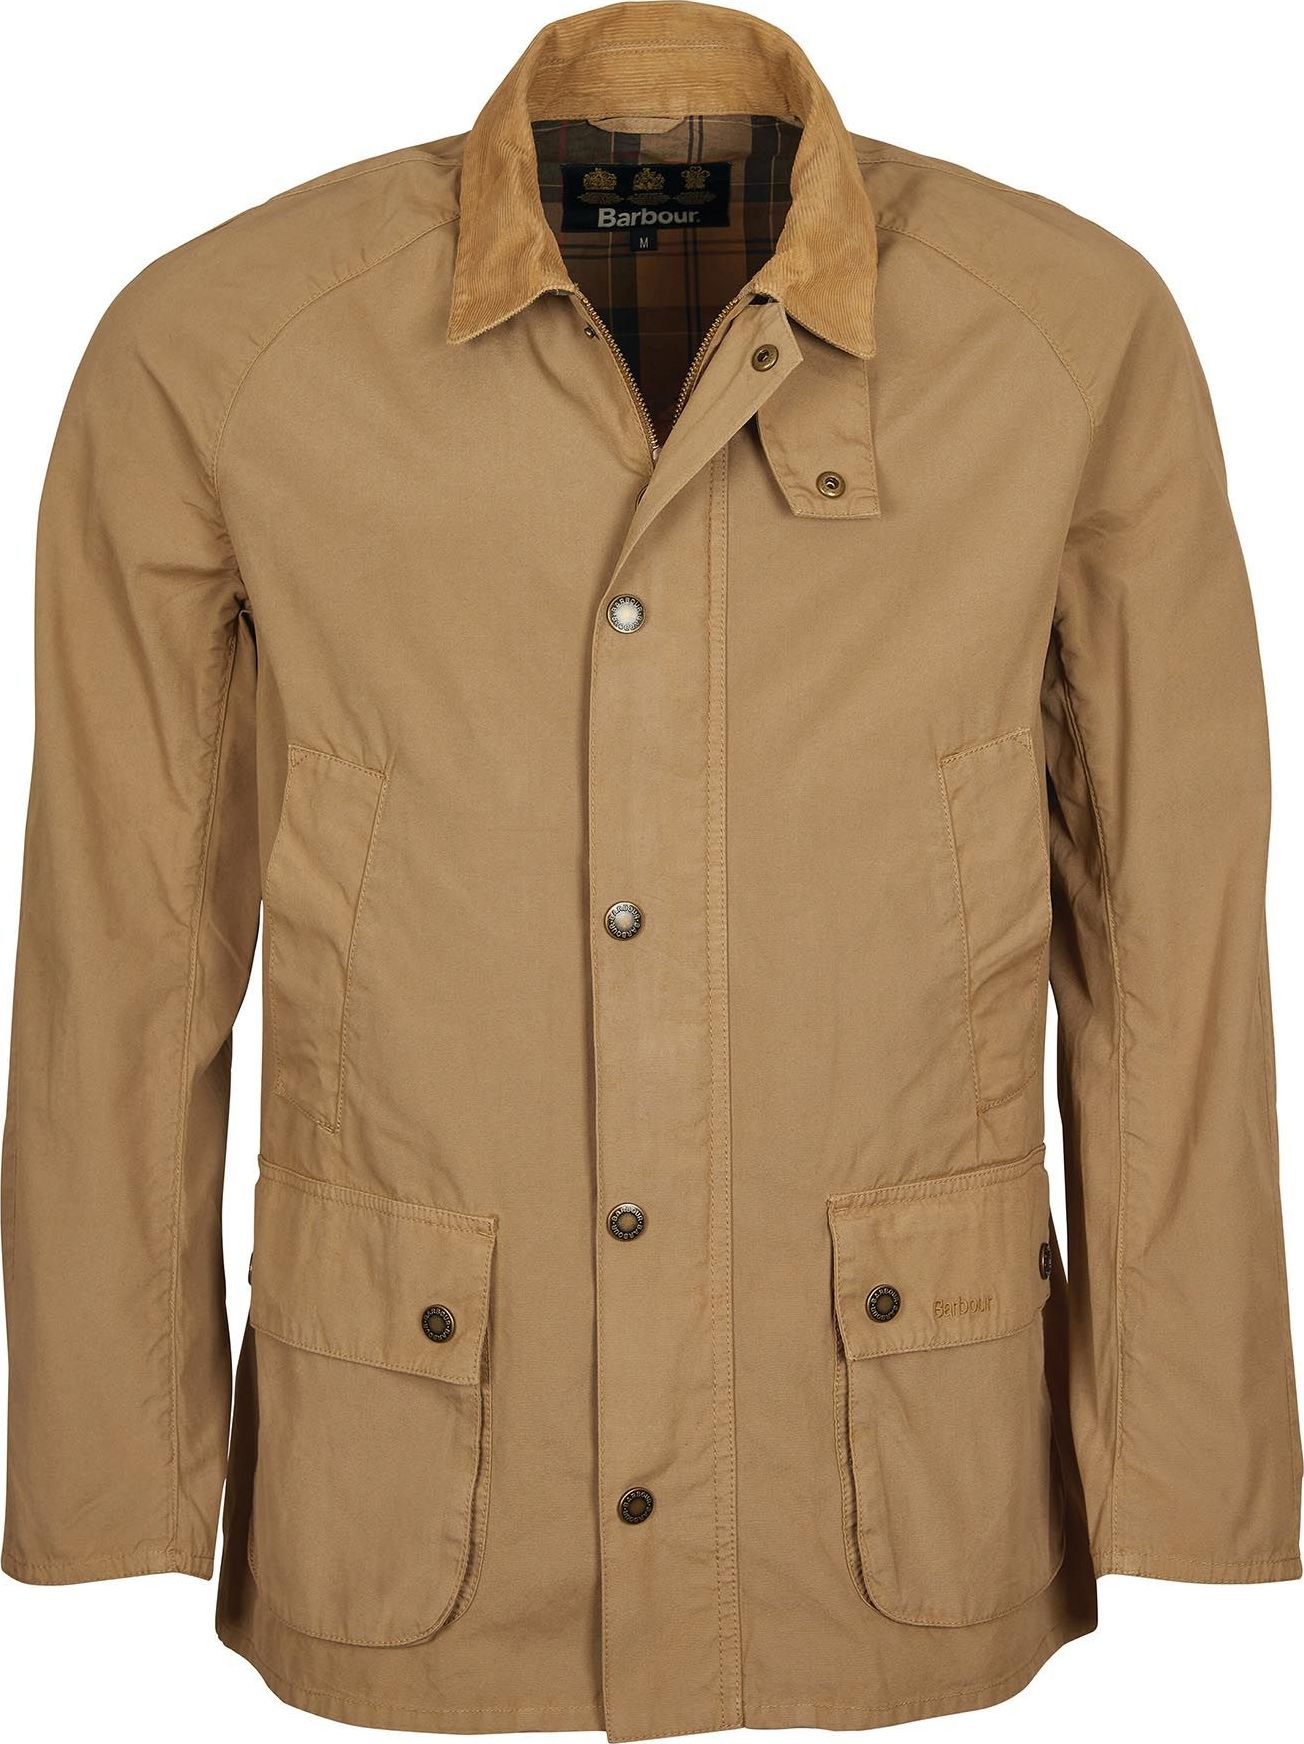 Barbour Men’s Ashby Casual Stone